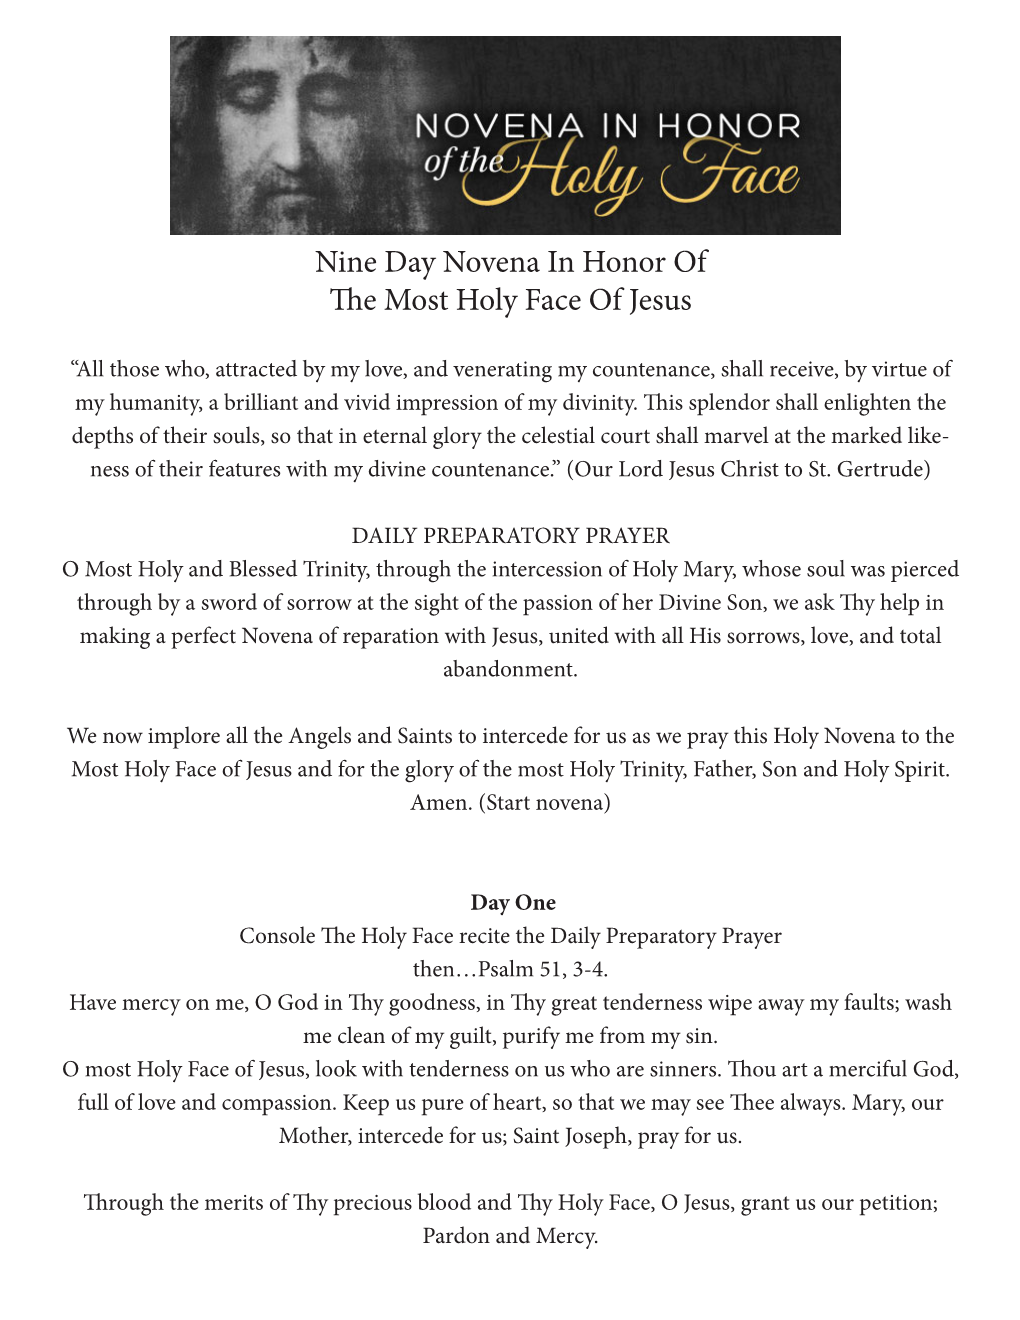 Nine Day Novena in Honor of the Most Holy Face of Jesus